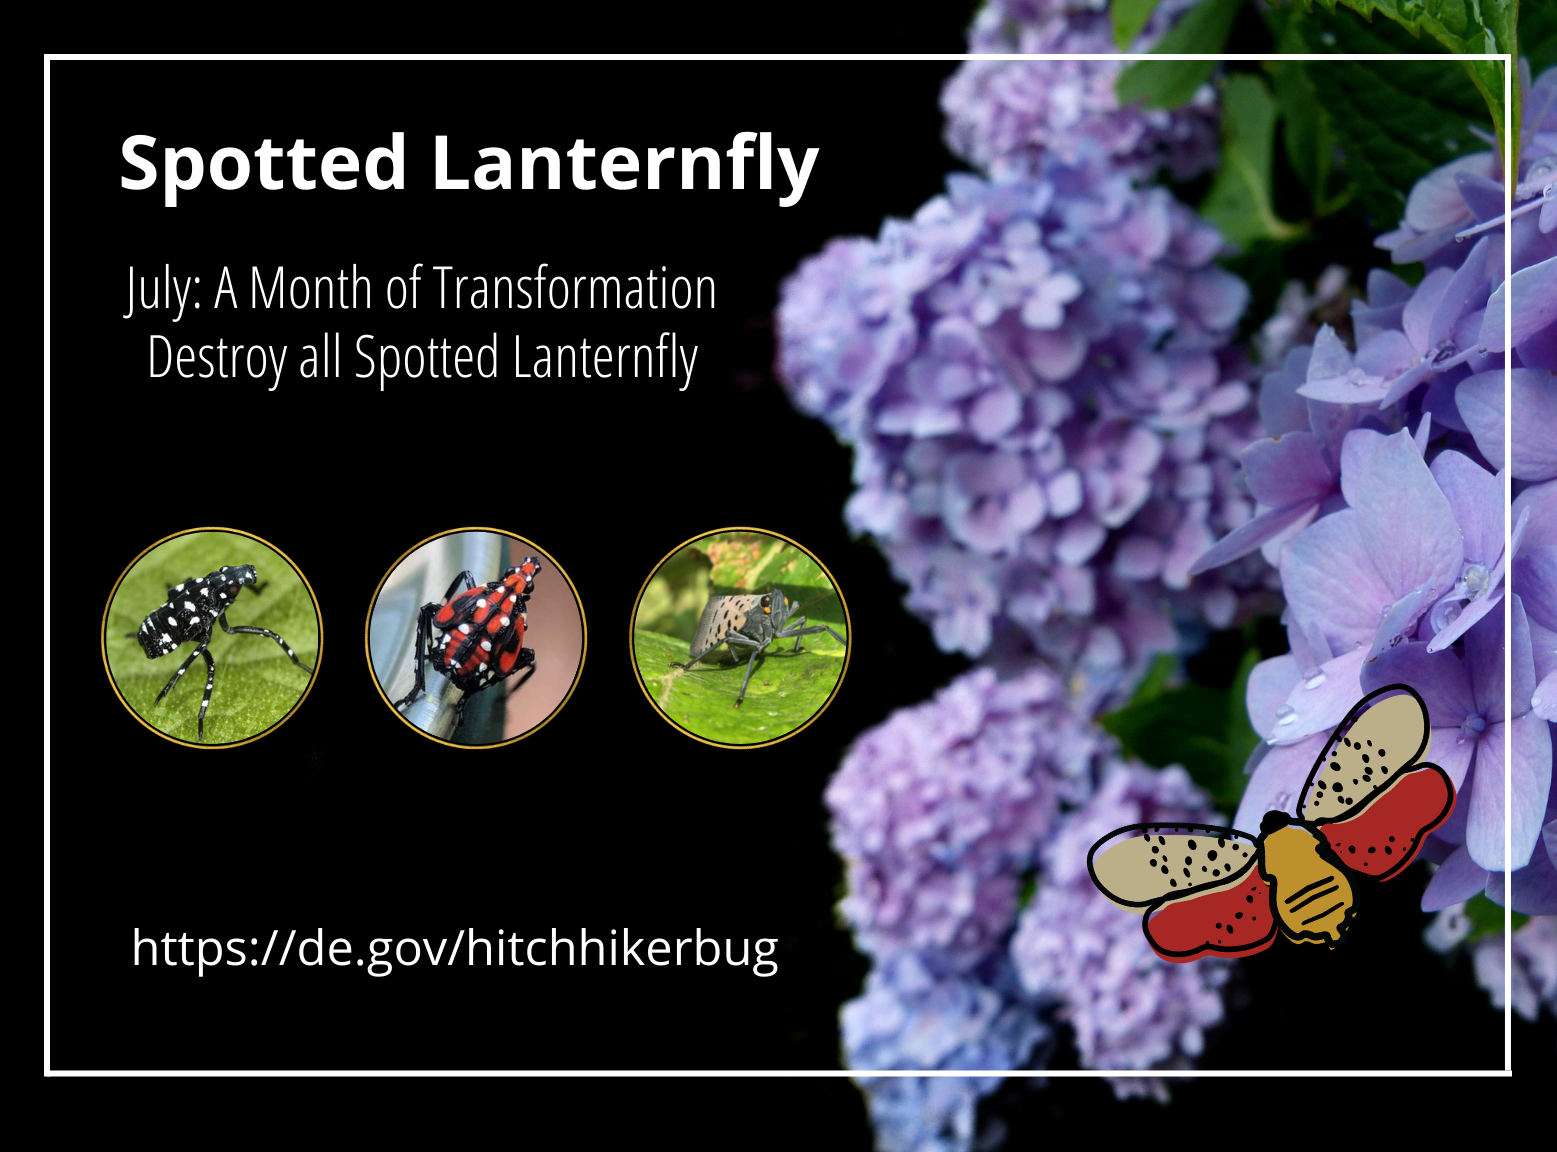 Black Background with purple hydrangea to the right side, the words "Spotted Lanternfly, July: A Month of Transformation, Destroy All Spotted Lanternfly" followed by pictures of 3rd and 4th instar nymphs and an adult spotted lanternfly, https://de.gov/hitchhikerbug